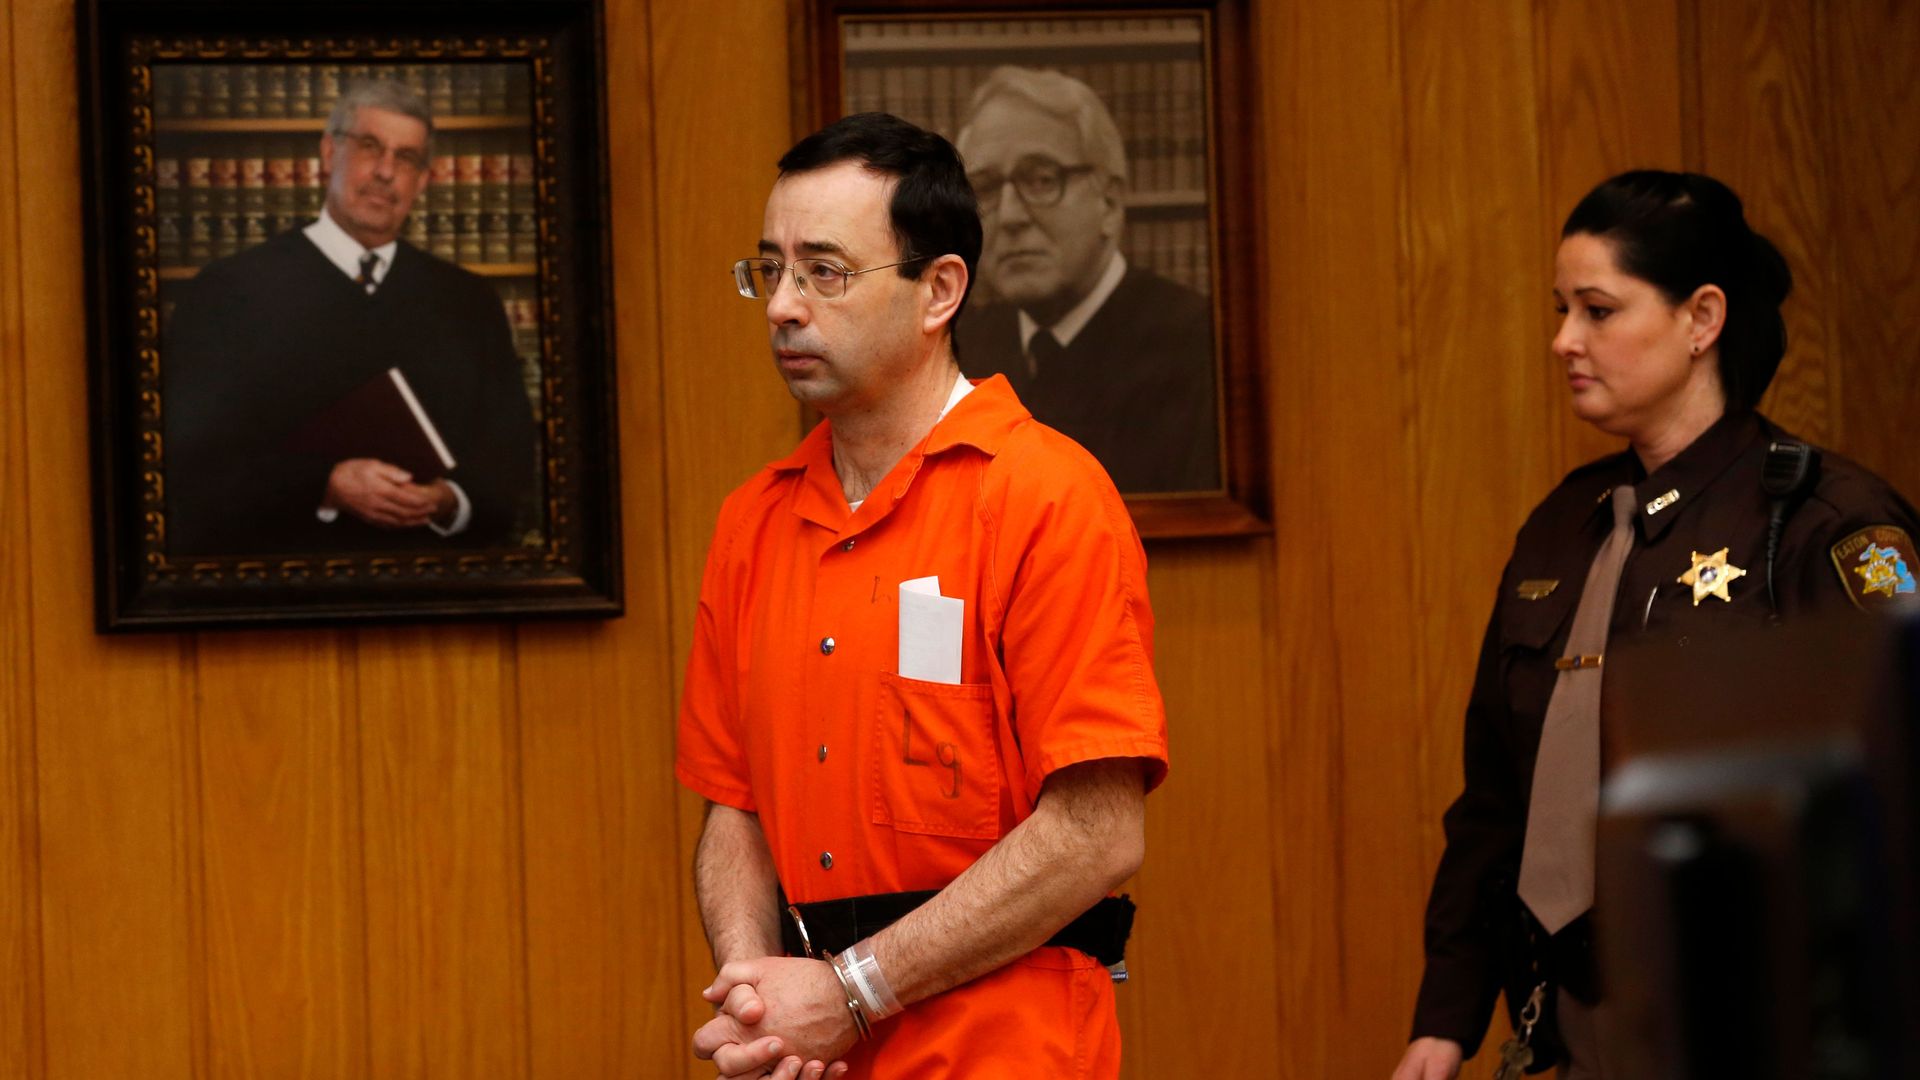  Larry Nassar enters the courtroom during the sentencing hearing in 2018